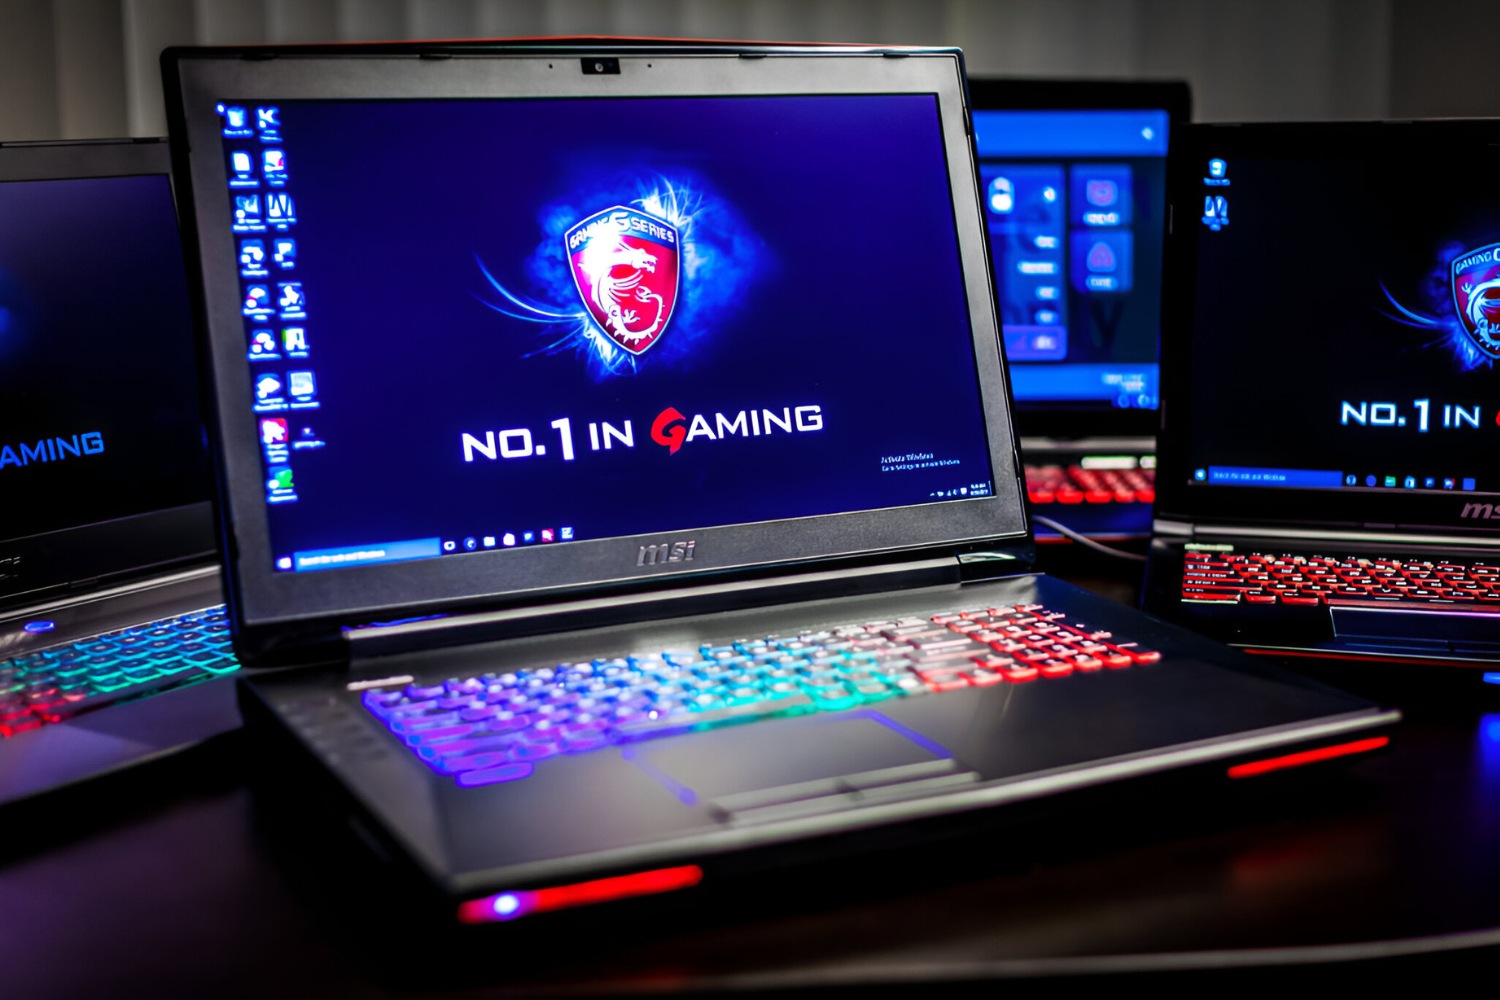 How To Get The Most Gaming Performance Out Of Ultrabook